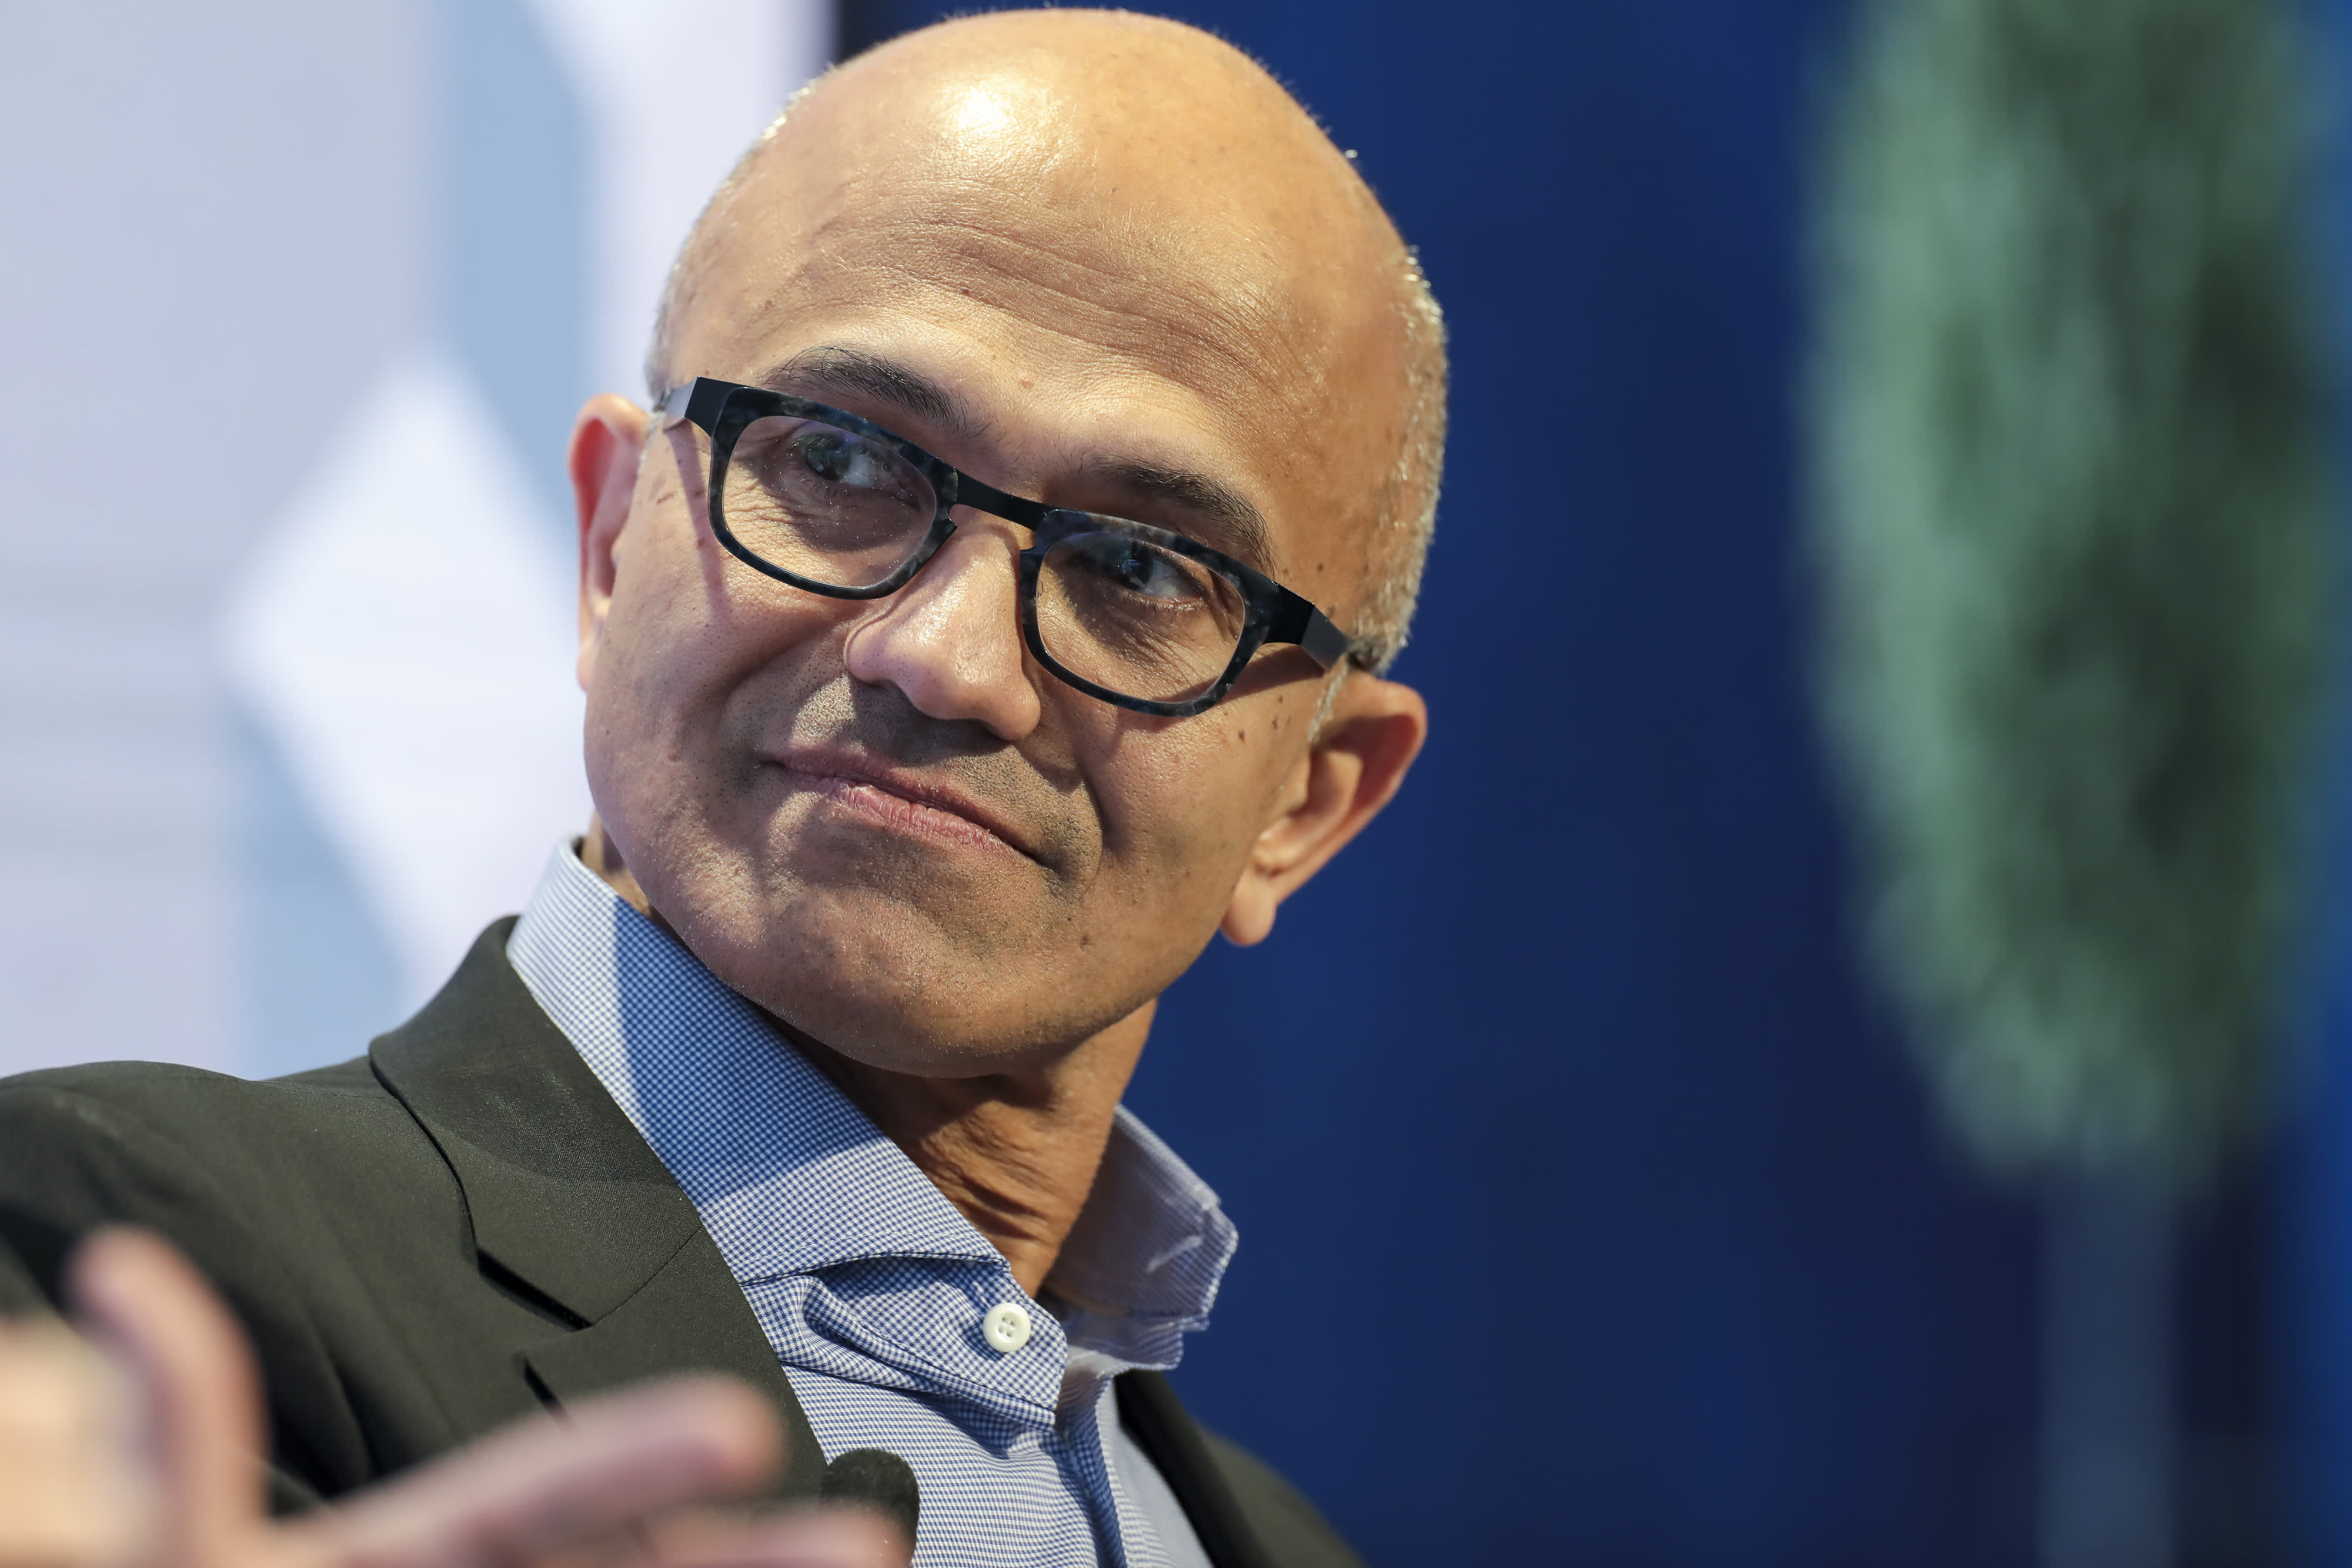 Microsoft acquires Nuance Communications in a $ 16 billion deal